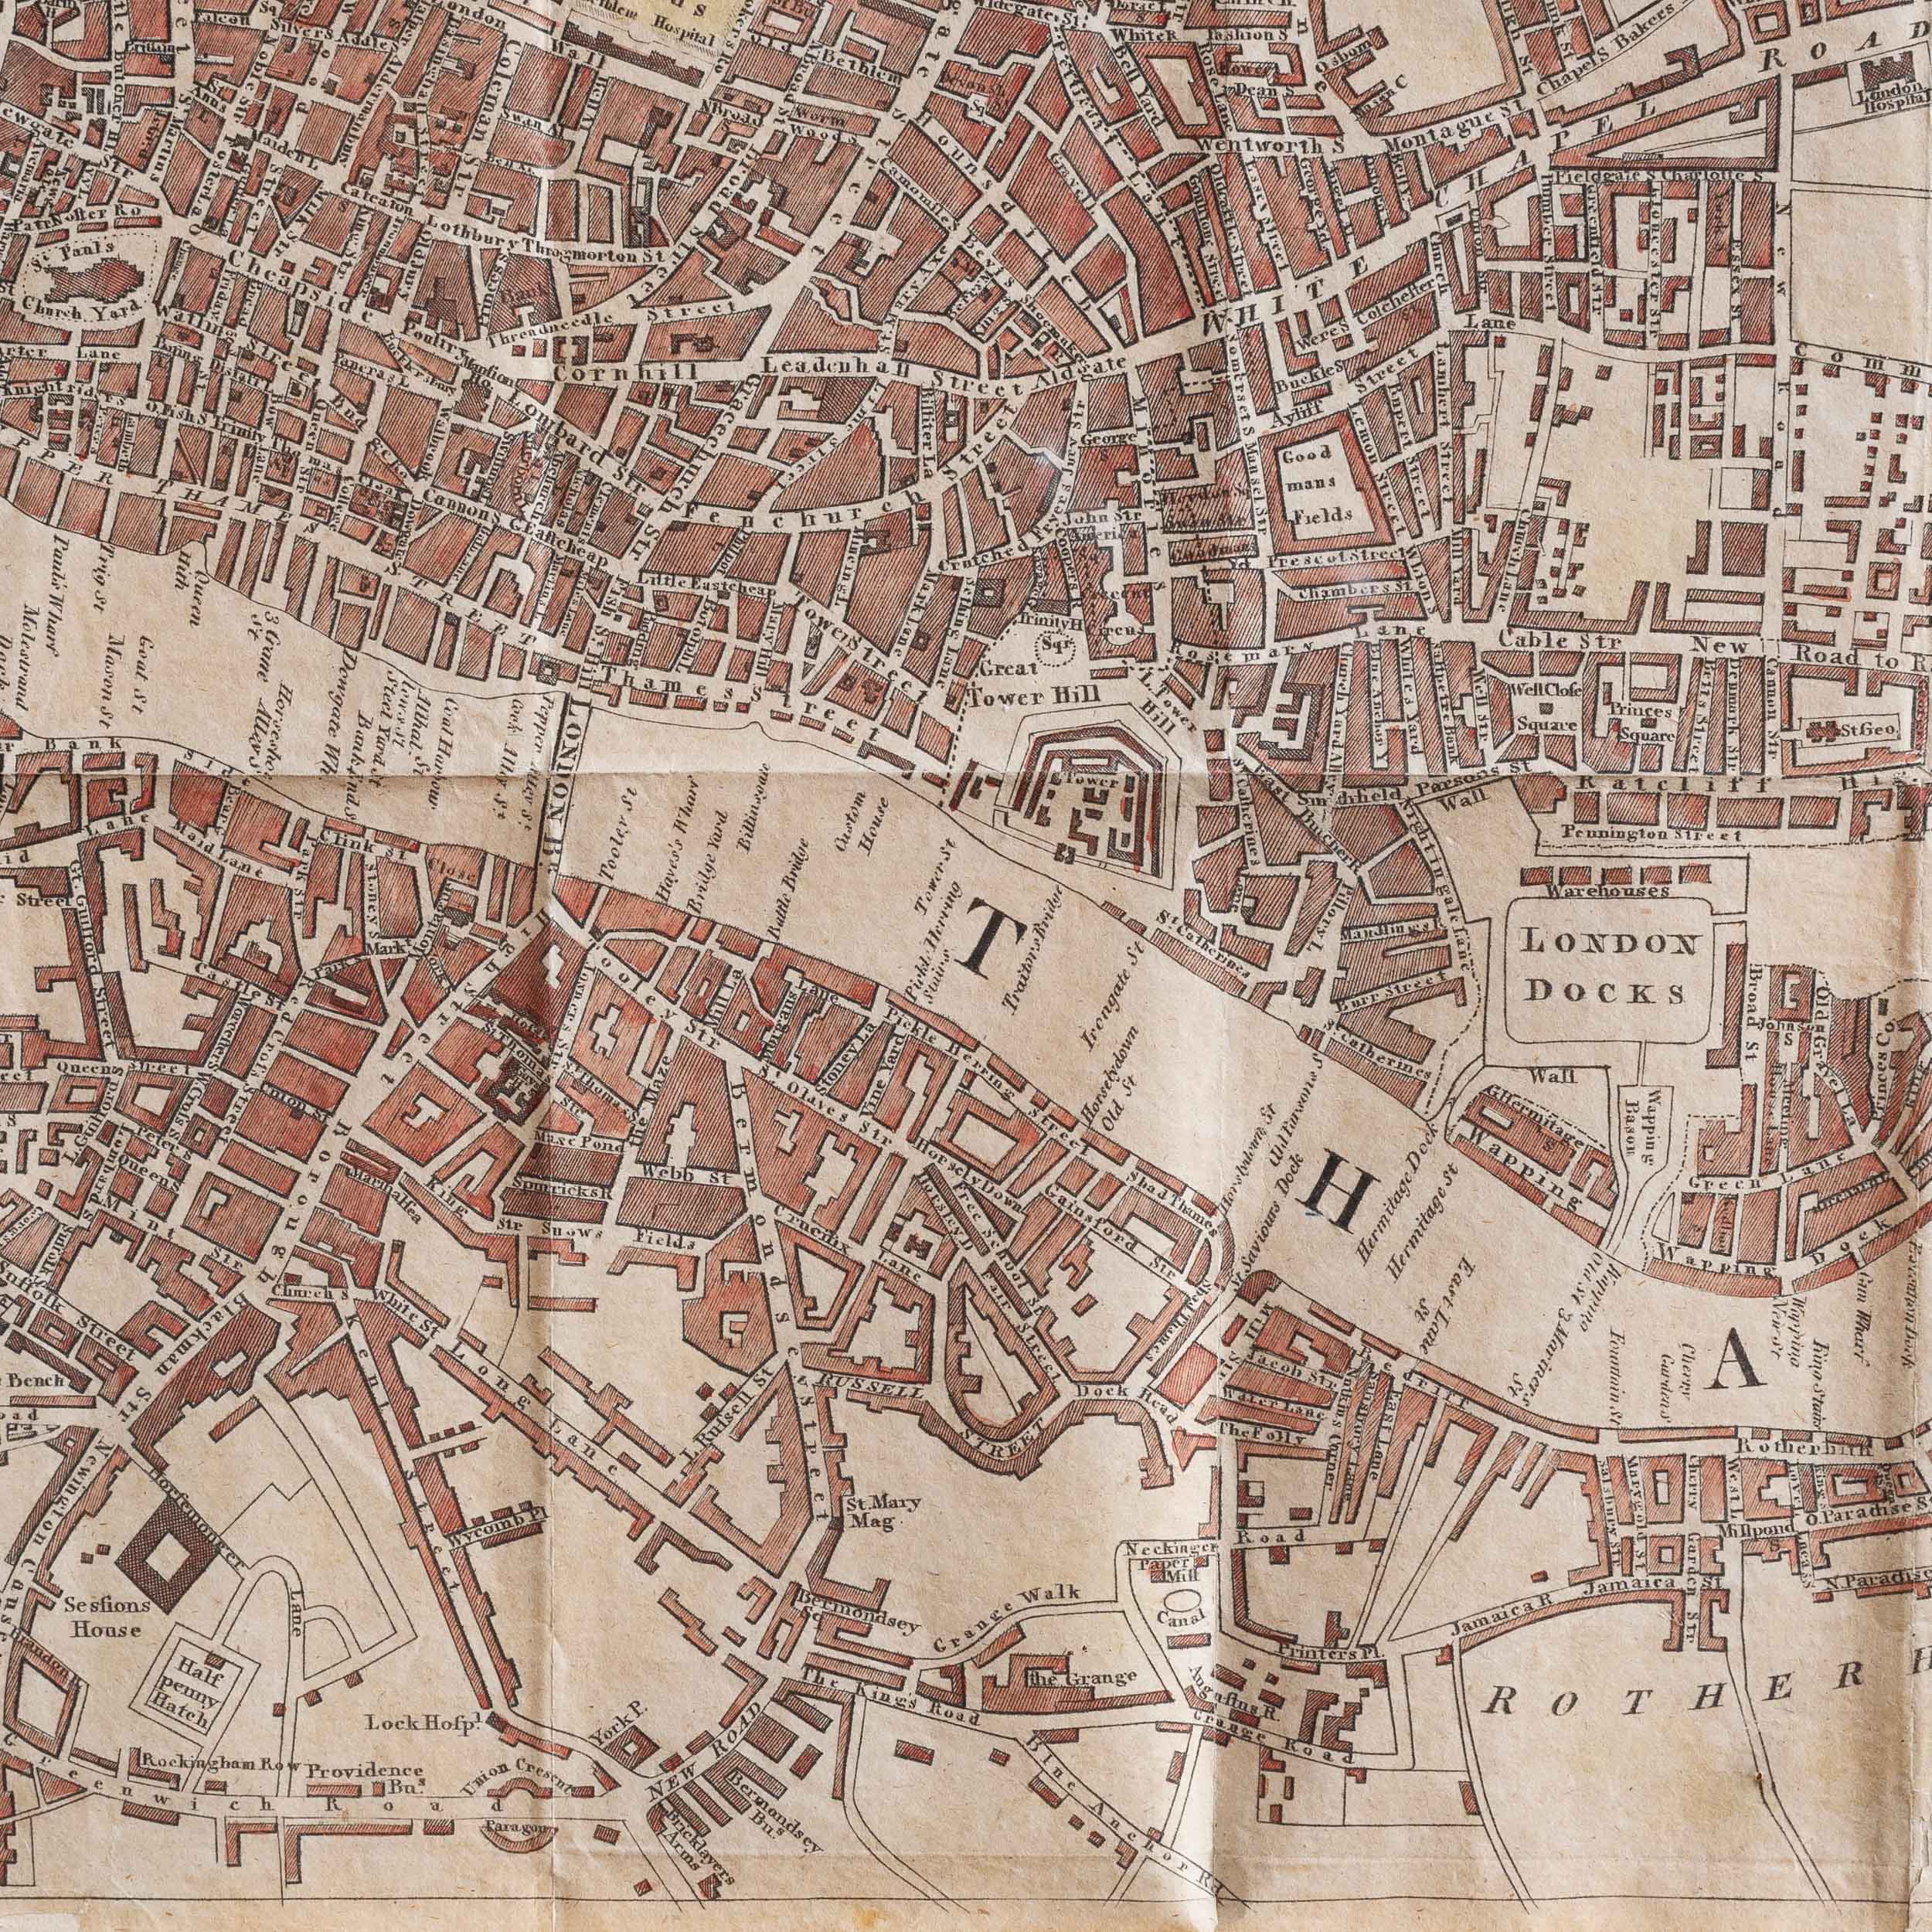 A New Plan of the Cities of Westminster - LASSCO - England's prime ...